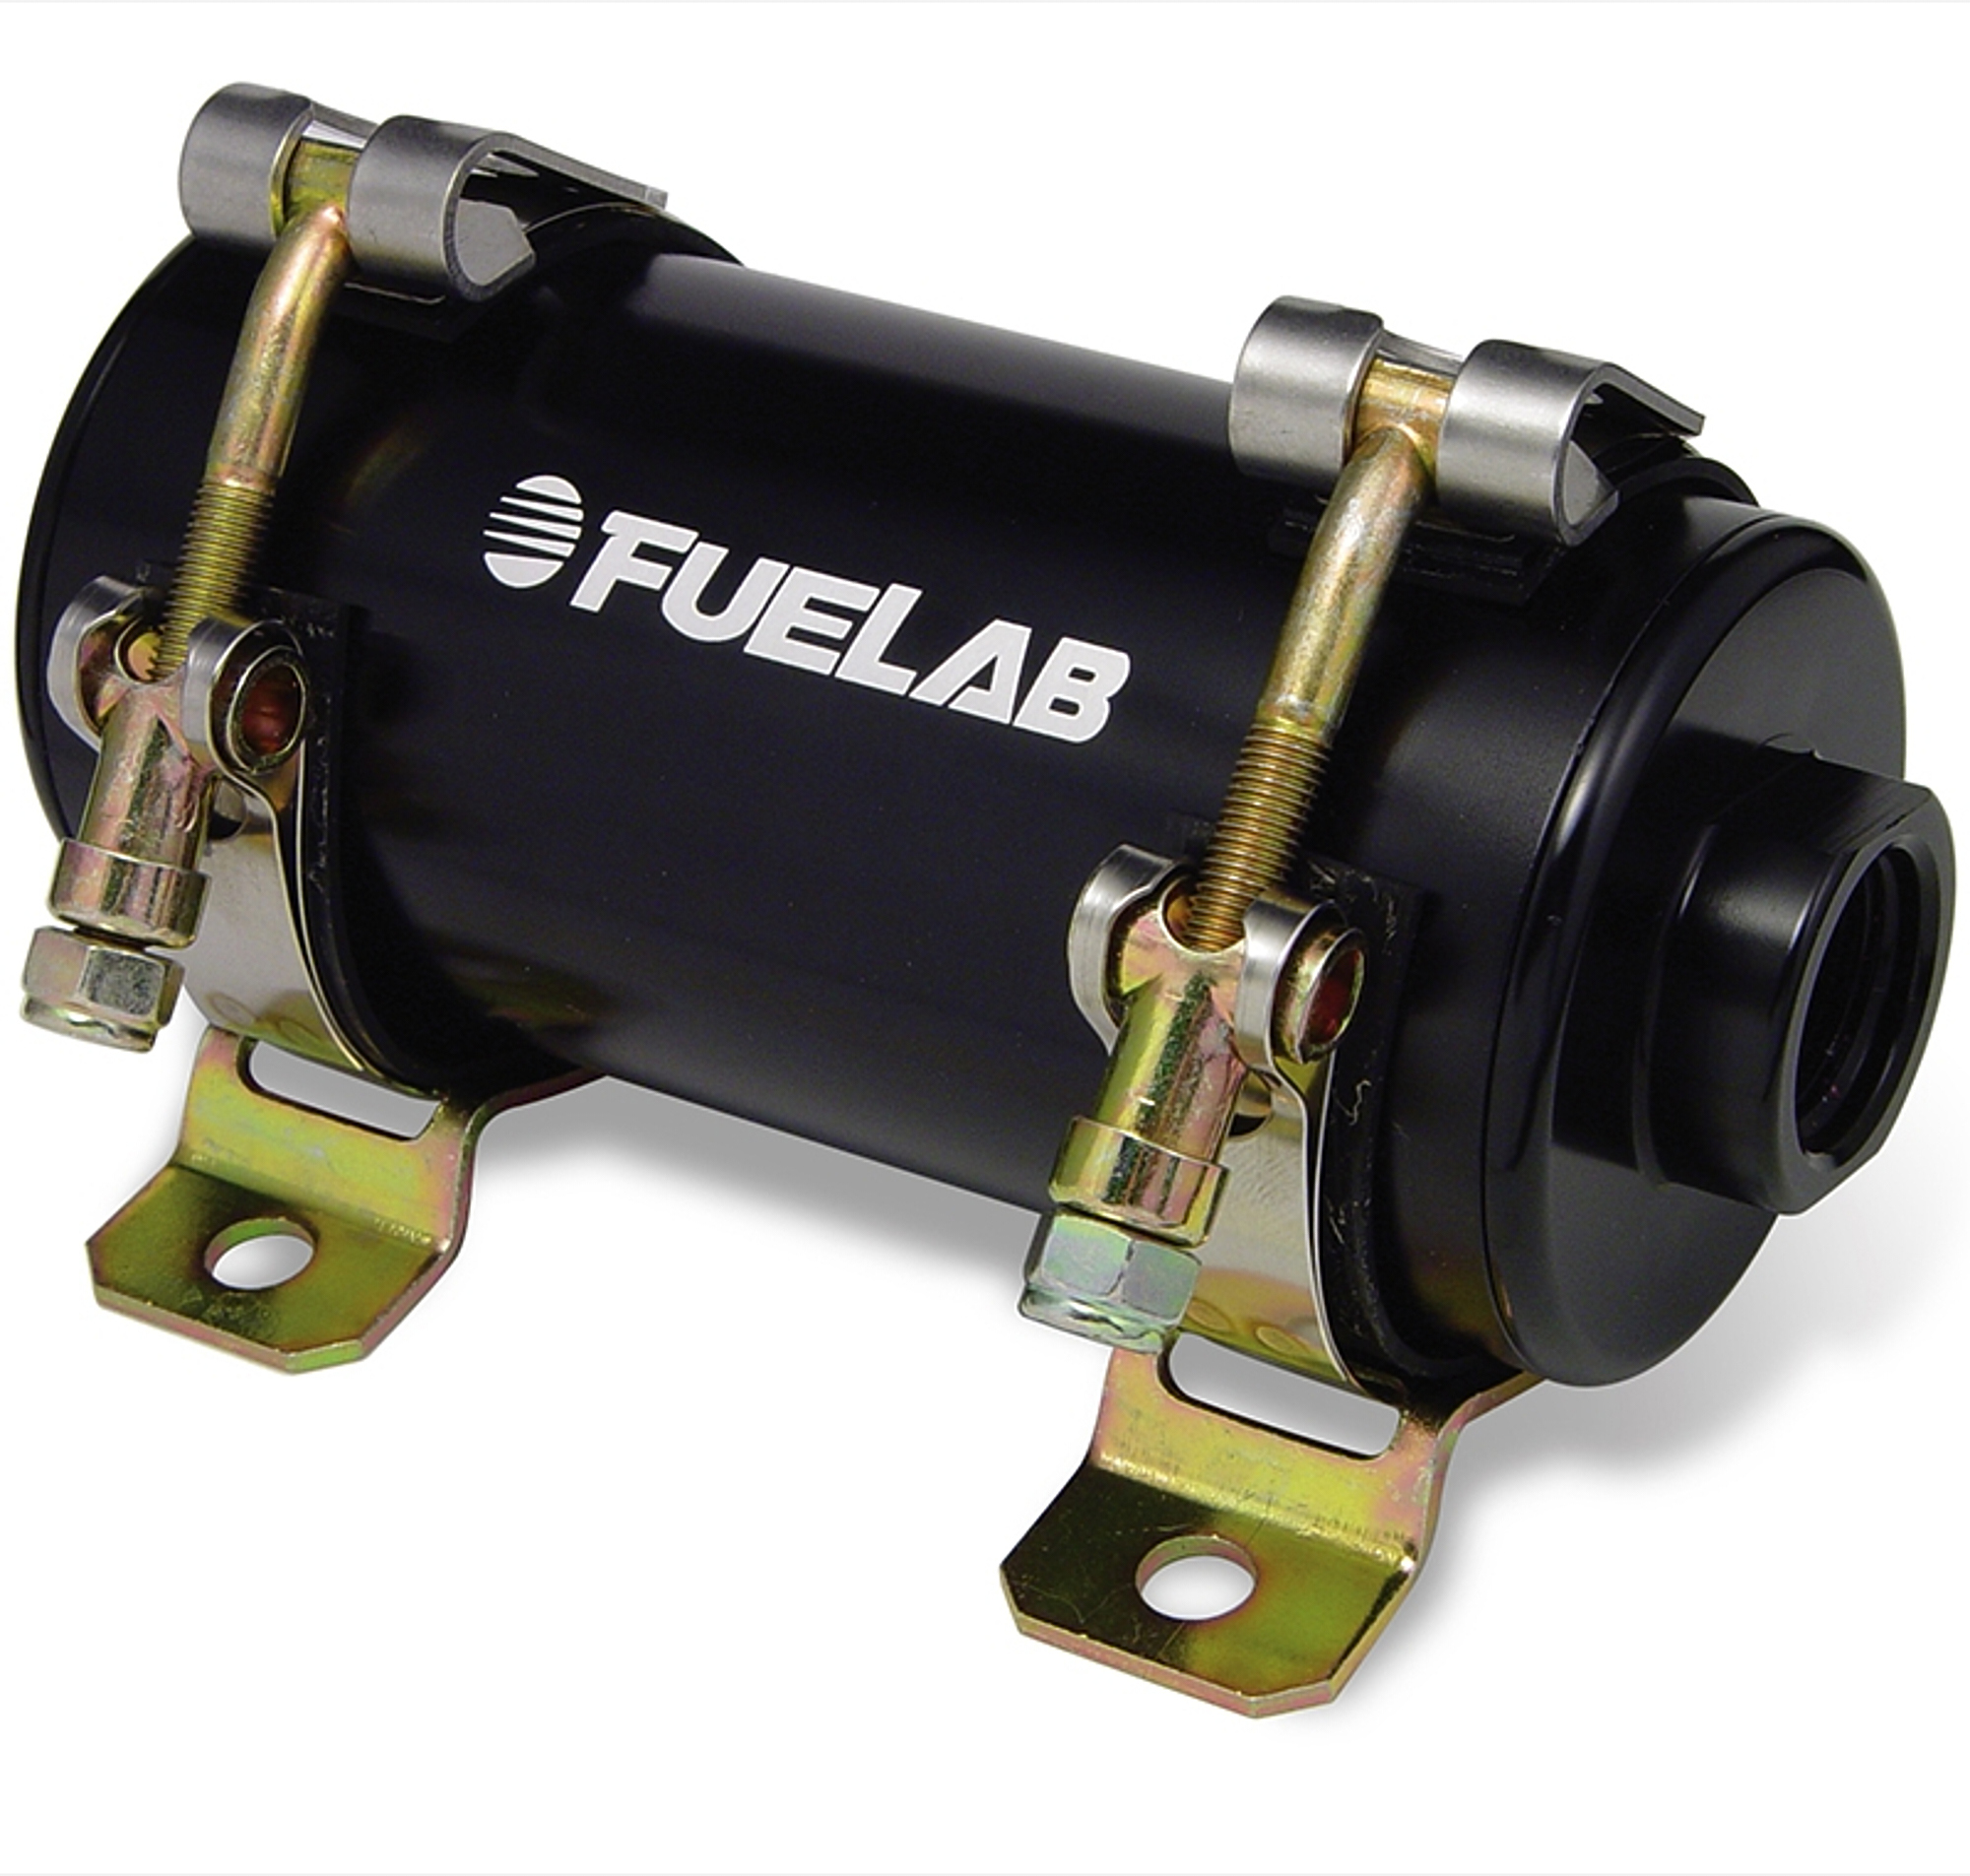 FueLab 41402-1 Fuel Pump, Electric, Inline, Brushless, 140 gph, 10 AN Female Inlet / 10 AN Female Outlet, Gas / Diesel / E85 / Methanol, Mounting Hardware Included, Aluminum, Black Anodized, Each